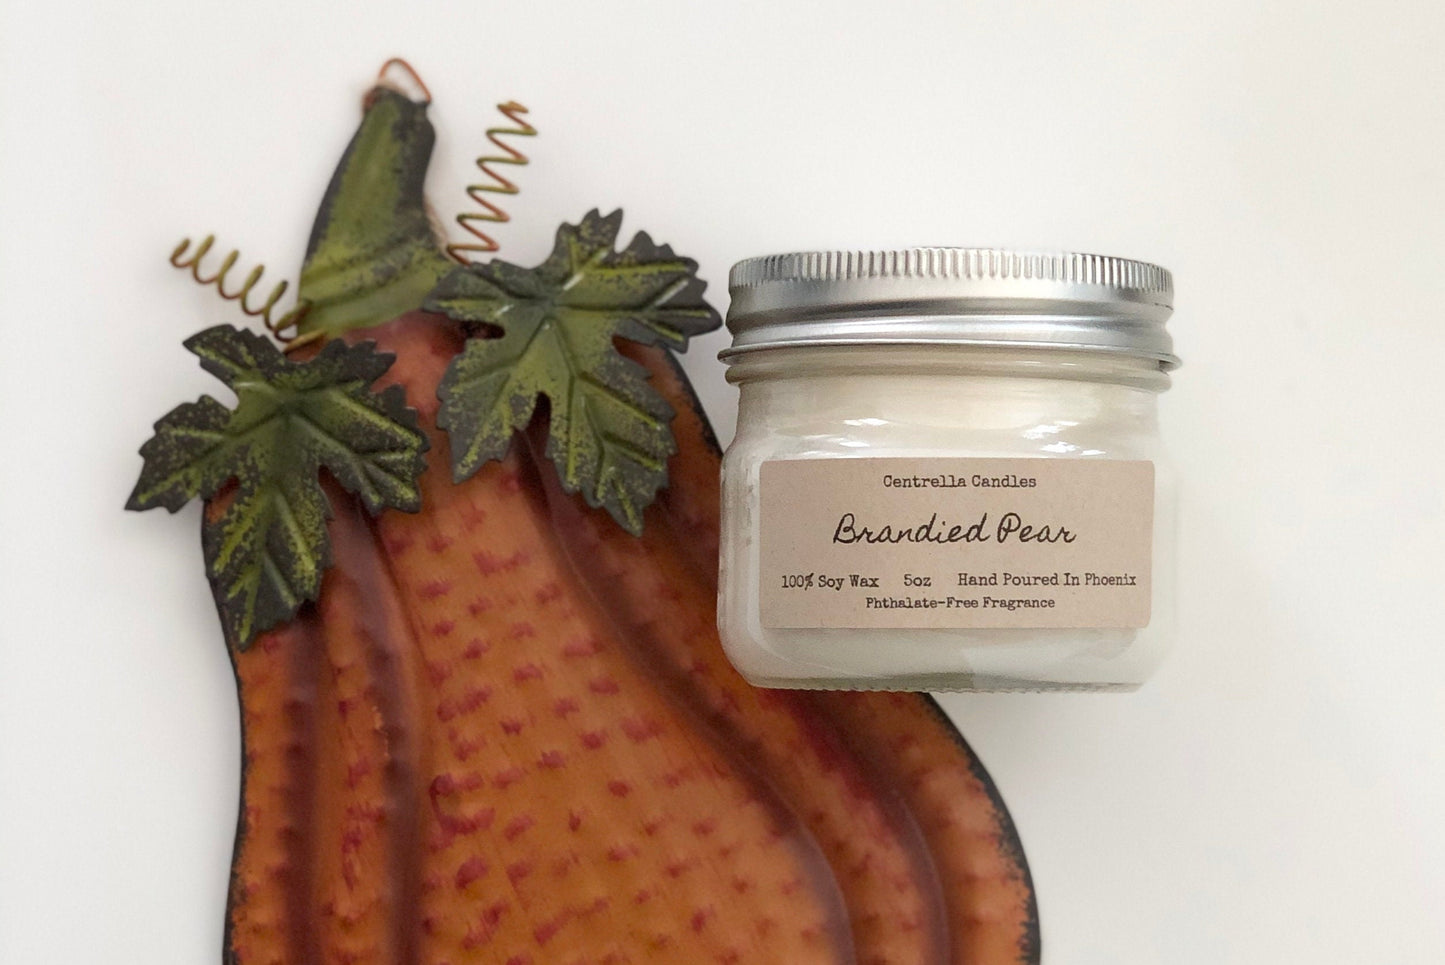 Brandied Pear Soy Candle